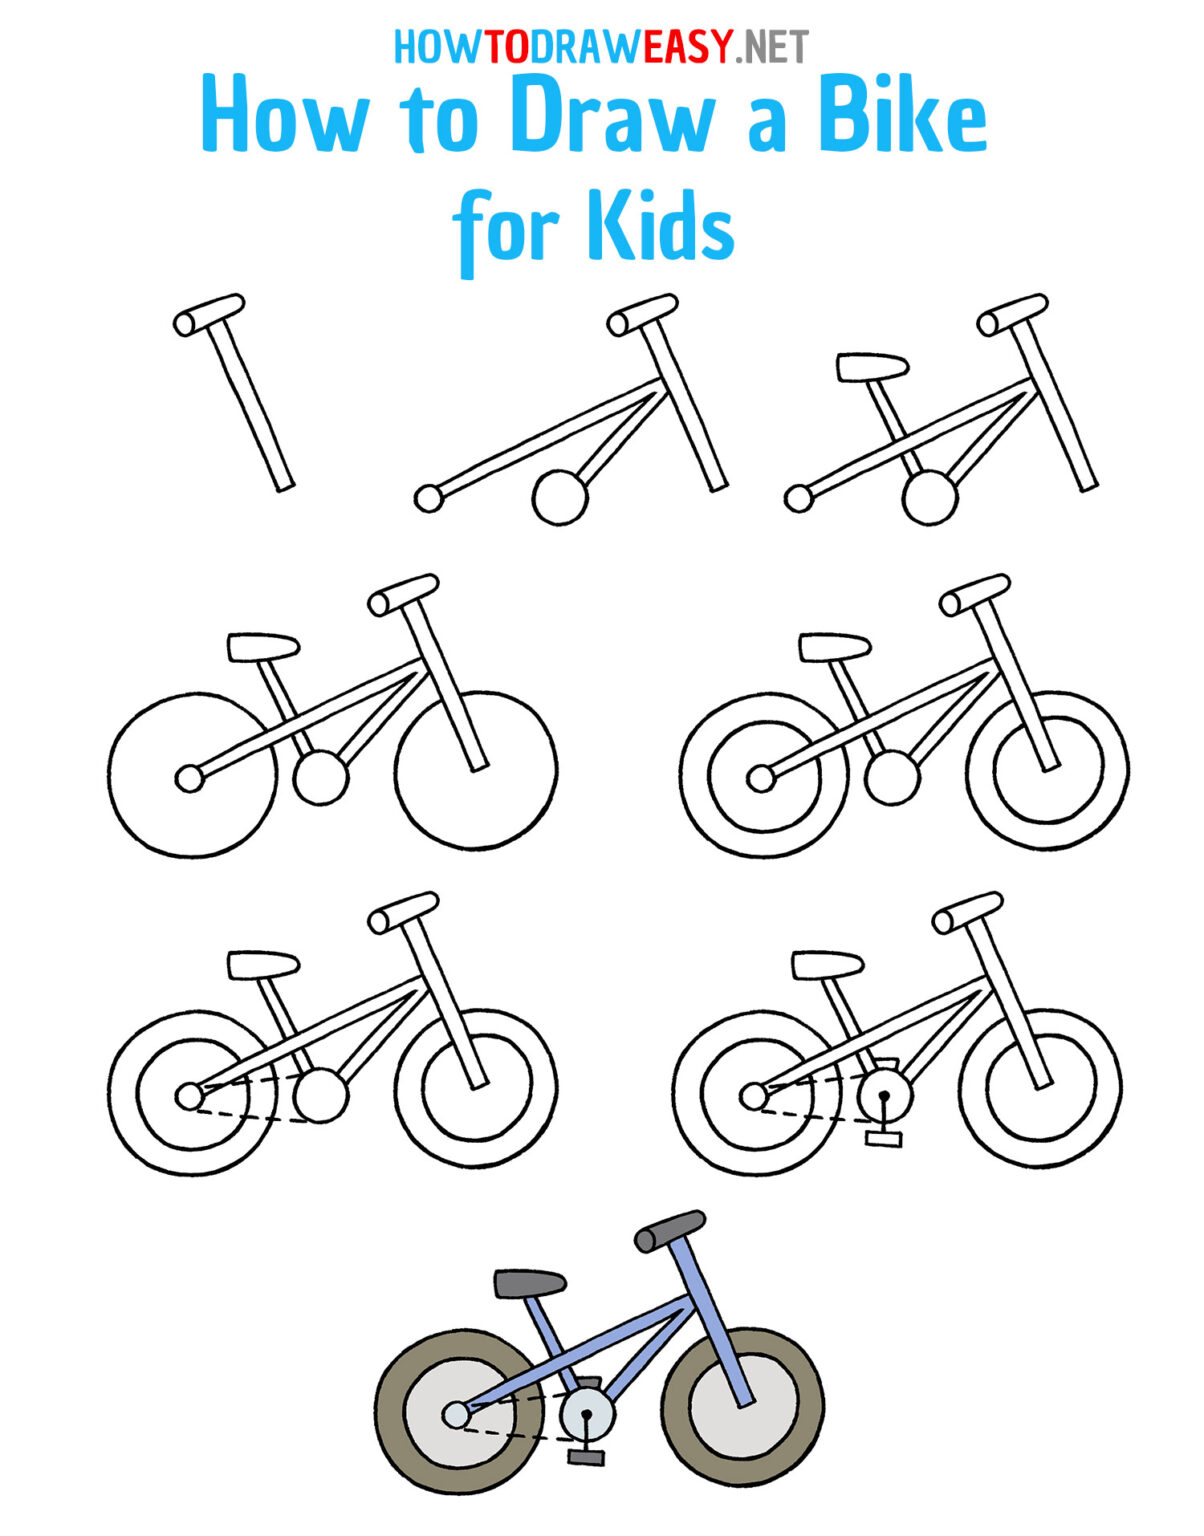 How to Draw a Bike for Kids - How to Draw Easy